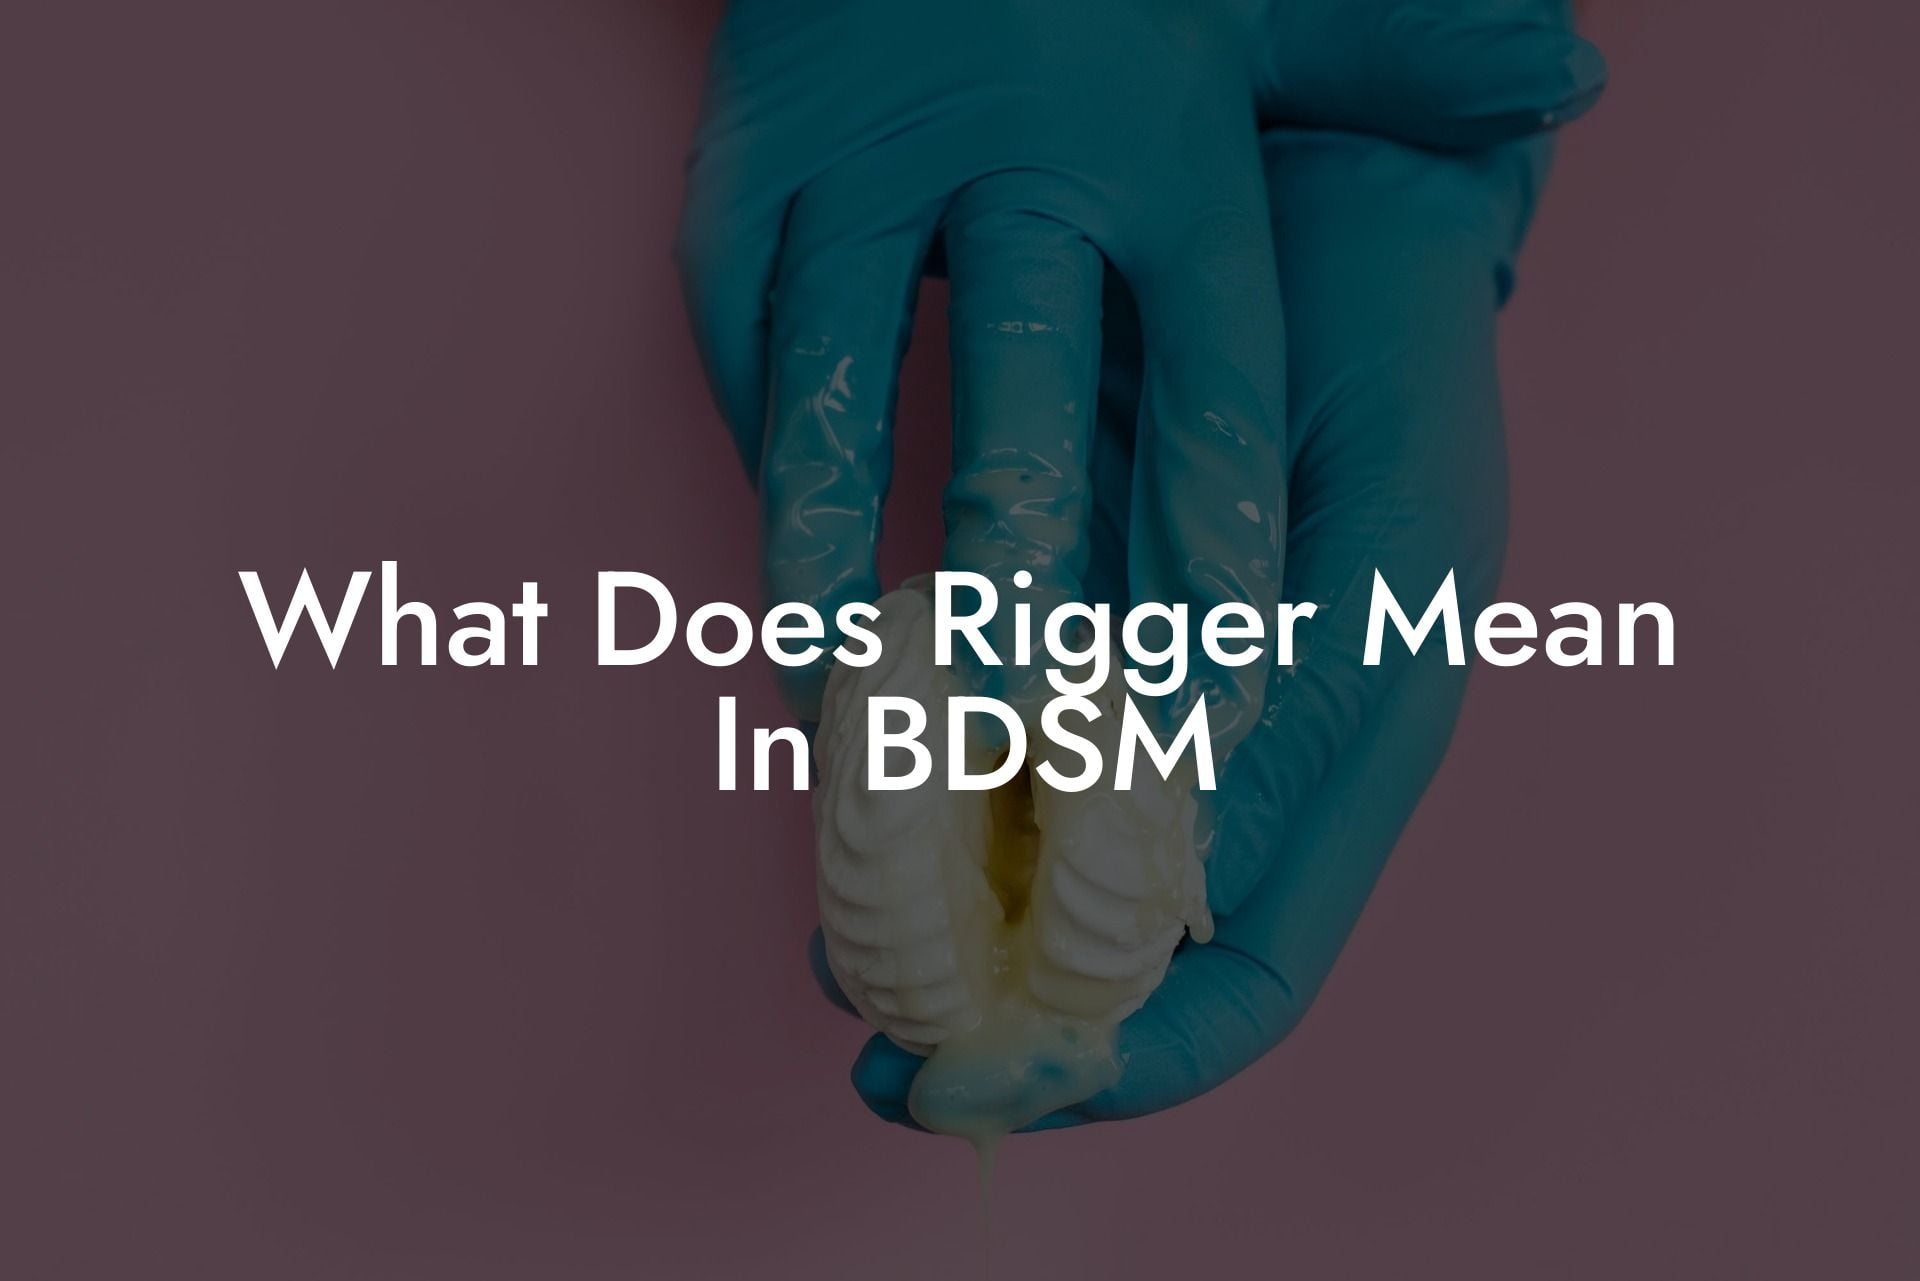 What Does Rigger Mean In BDSM